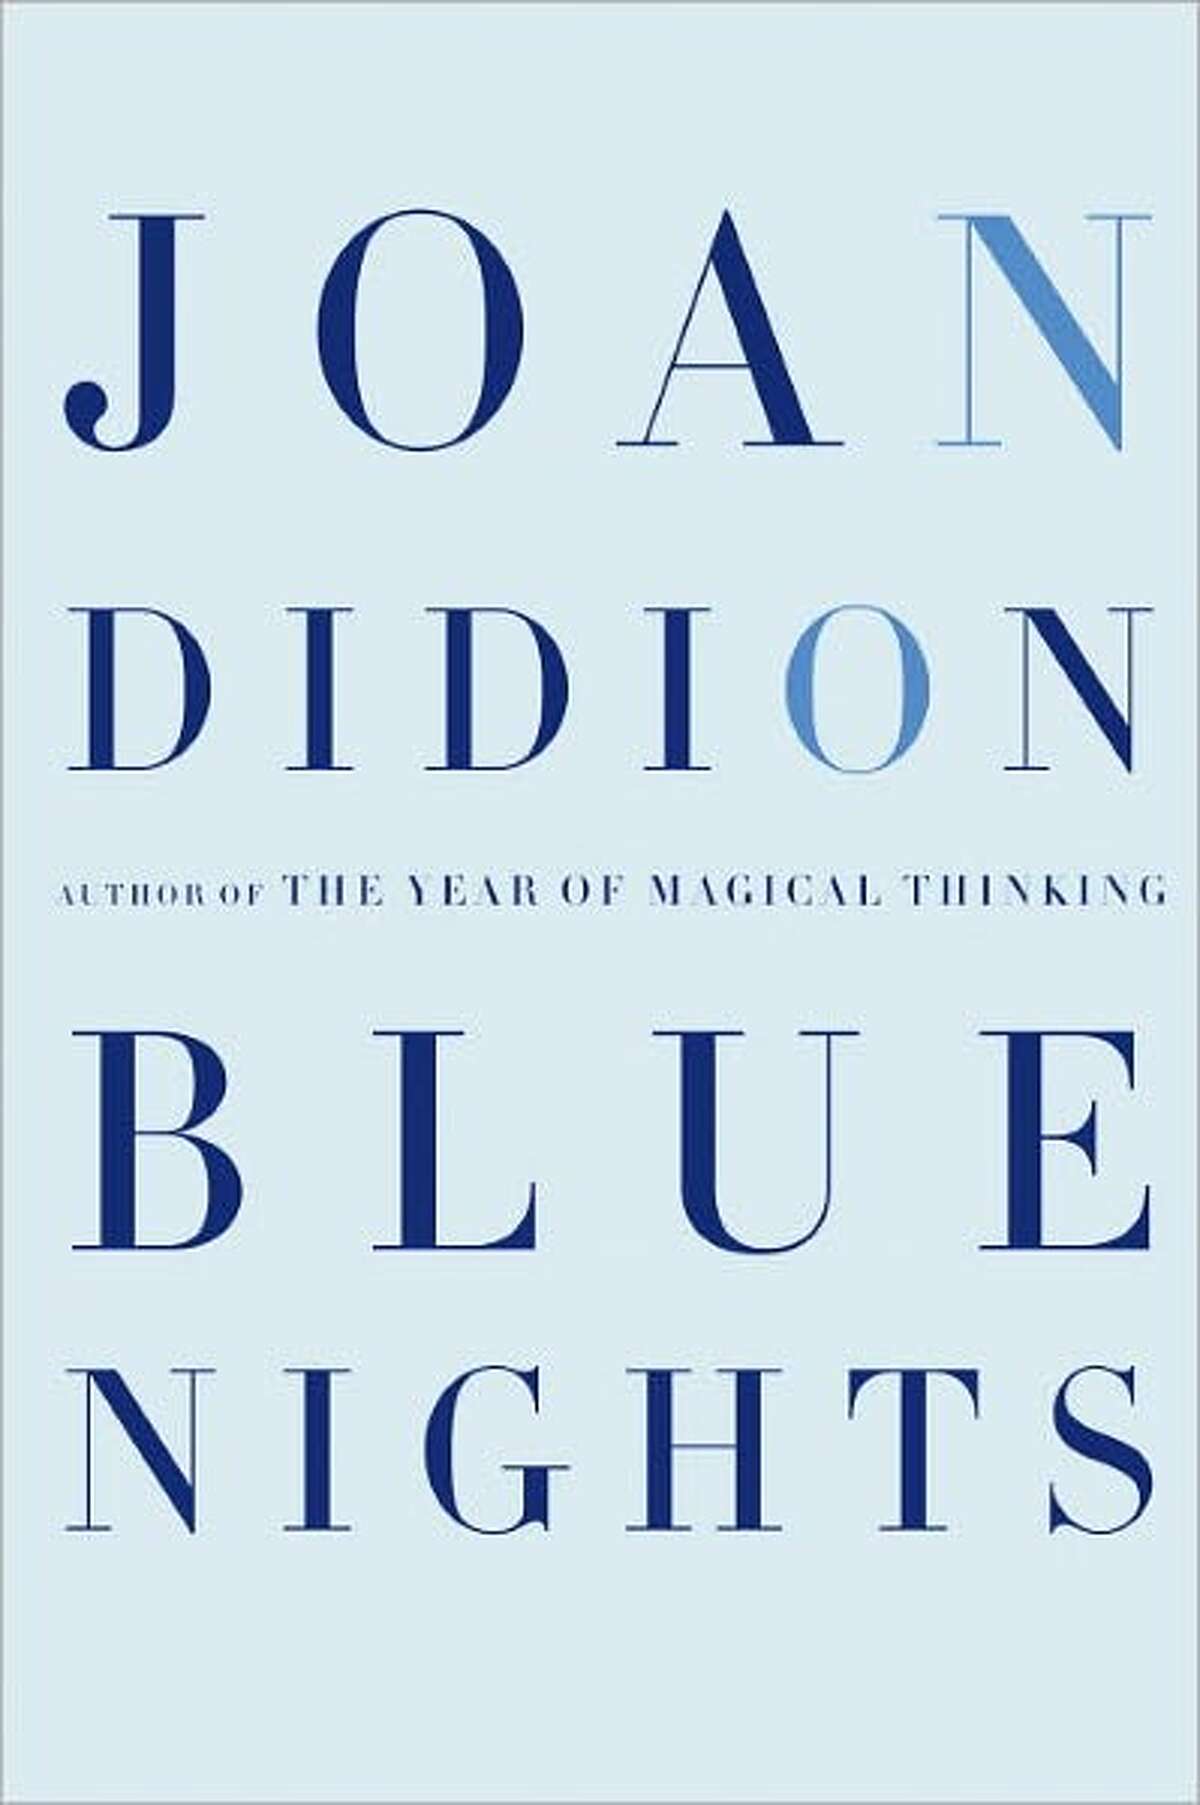 Cover for Blue Nights by Joan Didion